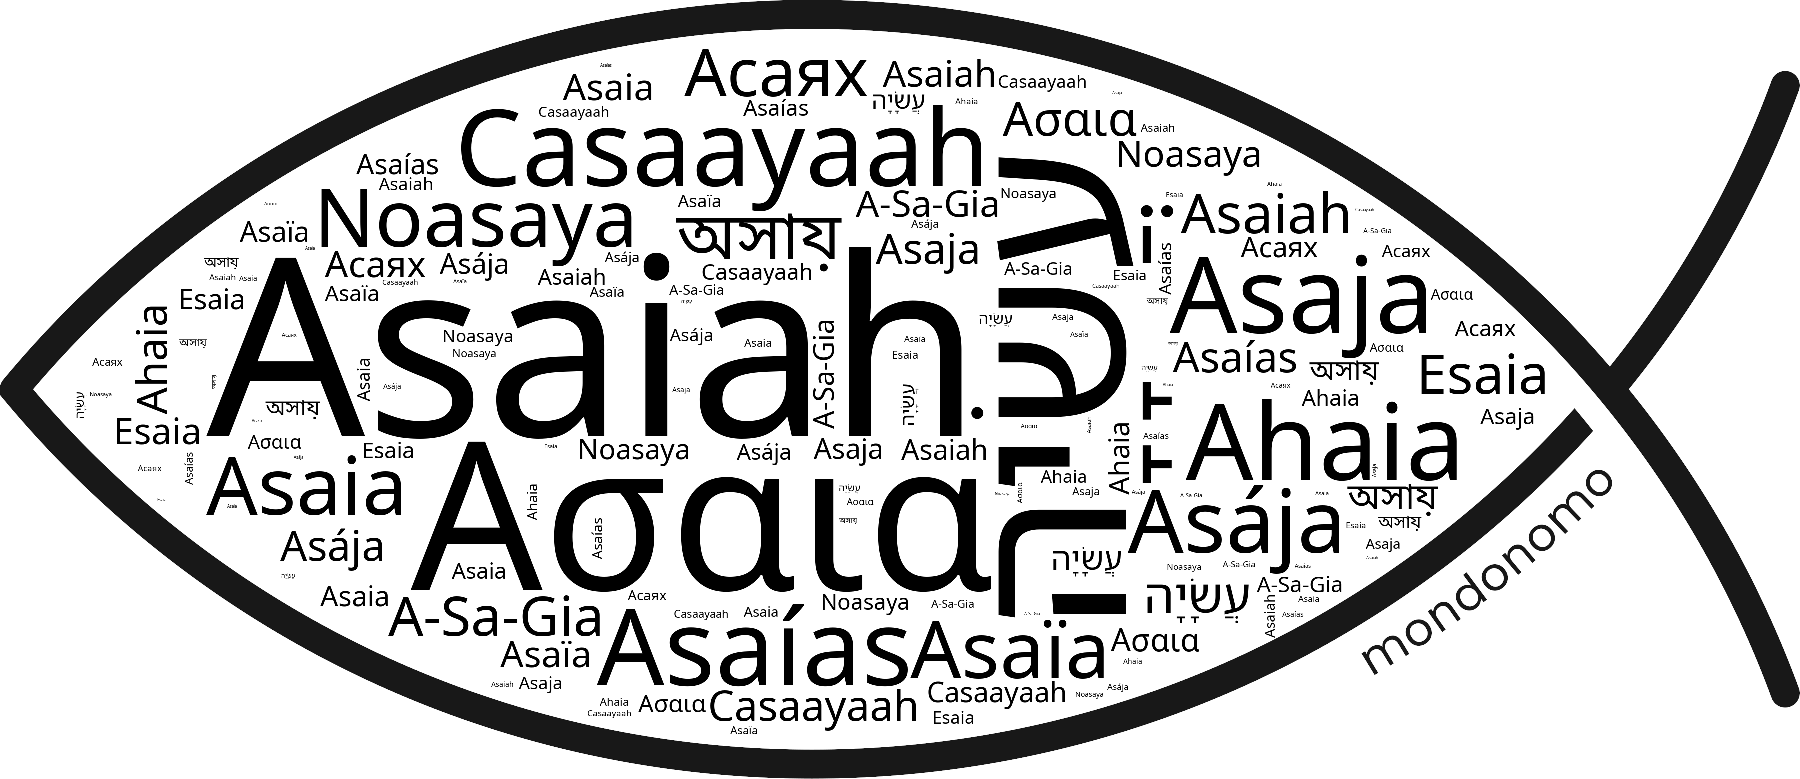 Name Asaiah in the world's Bibles